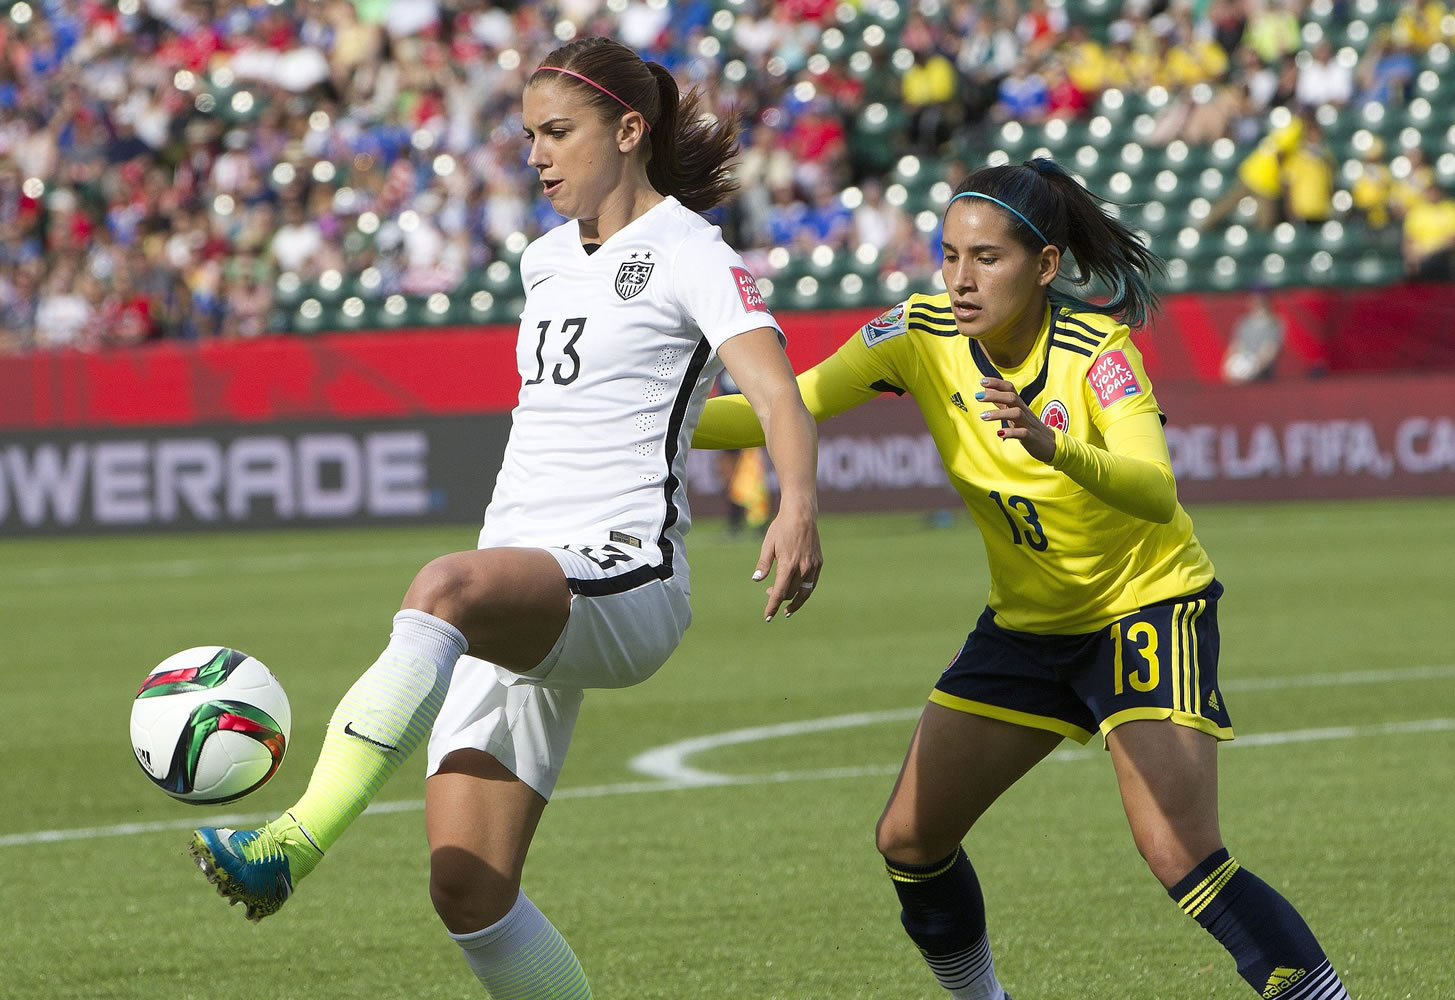 United States' Alex Morgan (13) kicks the ball in front of Colombia's Angela Clavijo (13) during first half in Edmonton, Alberta, Canada, Monday, June 22, 2015.